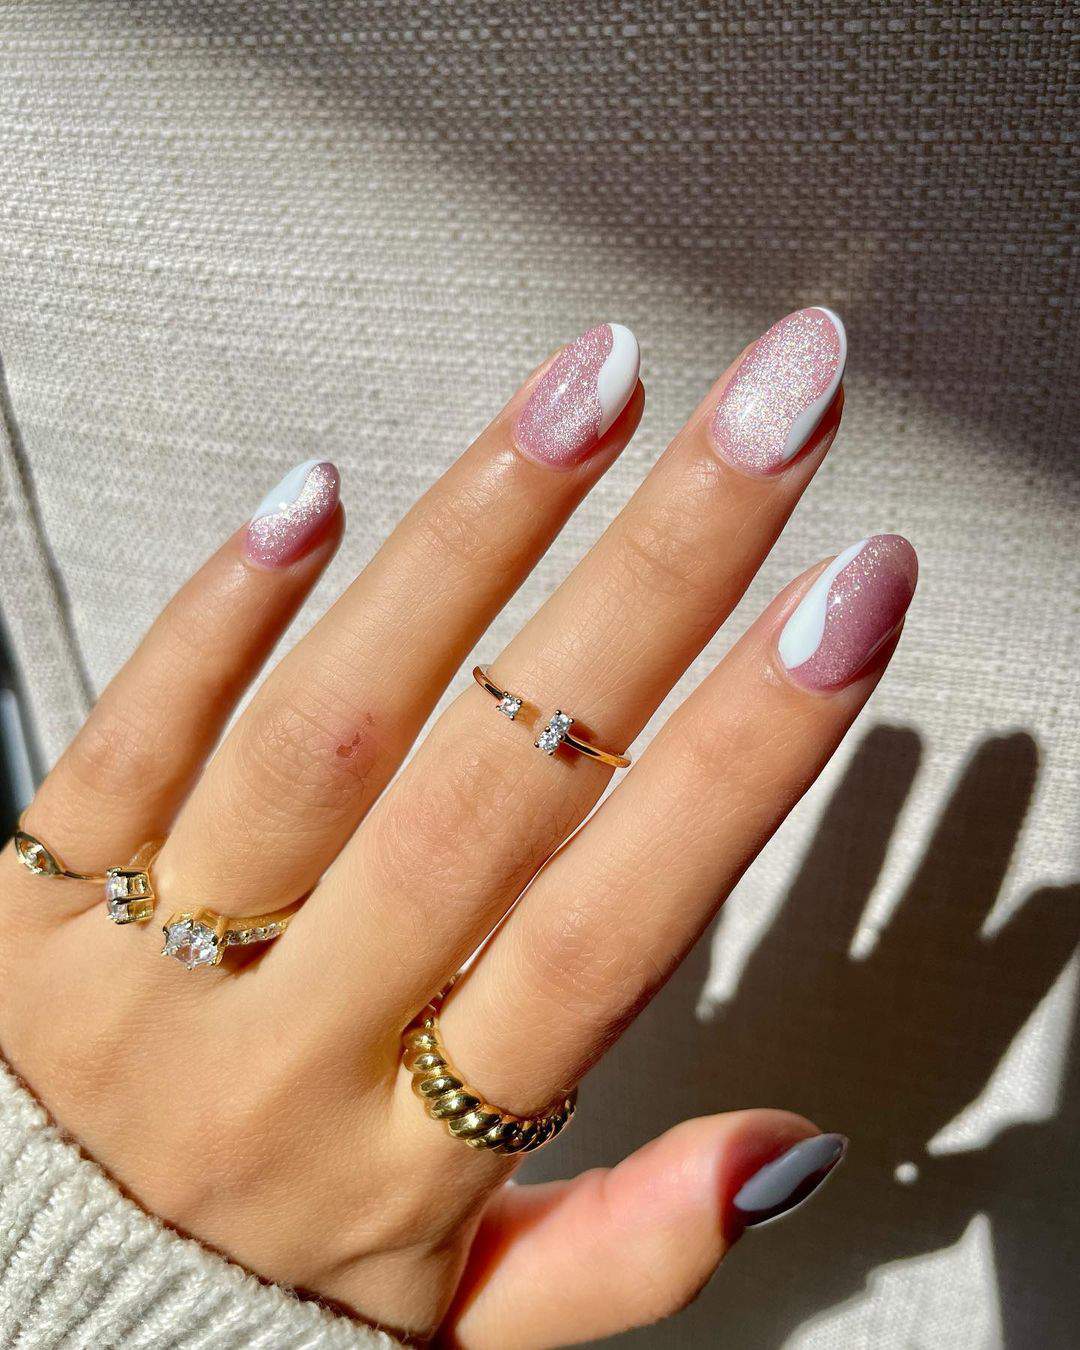 The 100+ Best Nail Designs Trends And Ideas In 2021 images 28